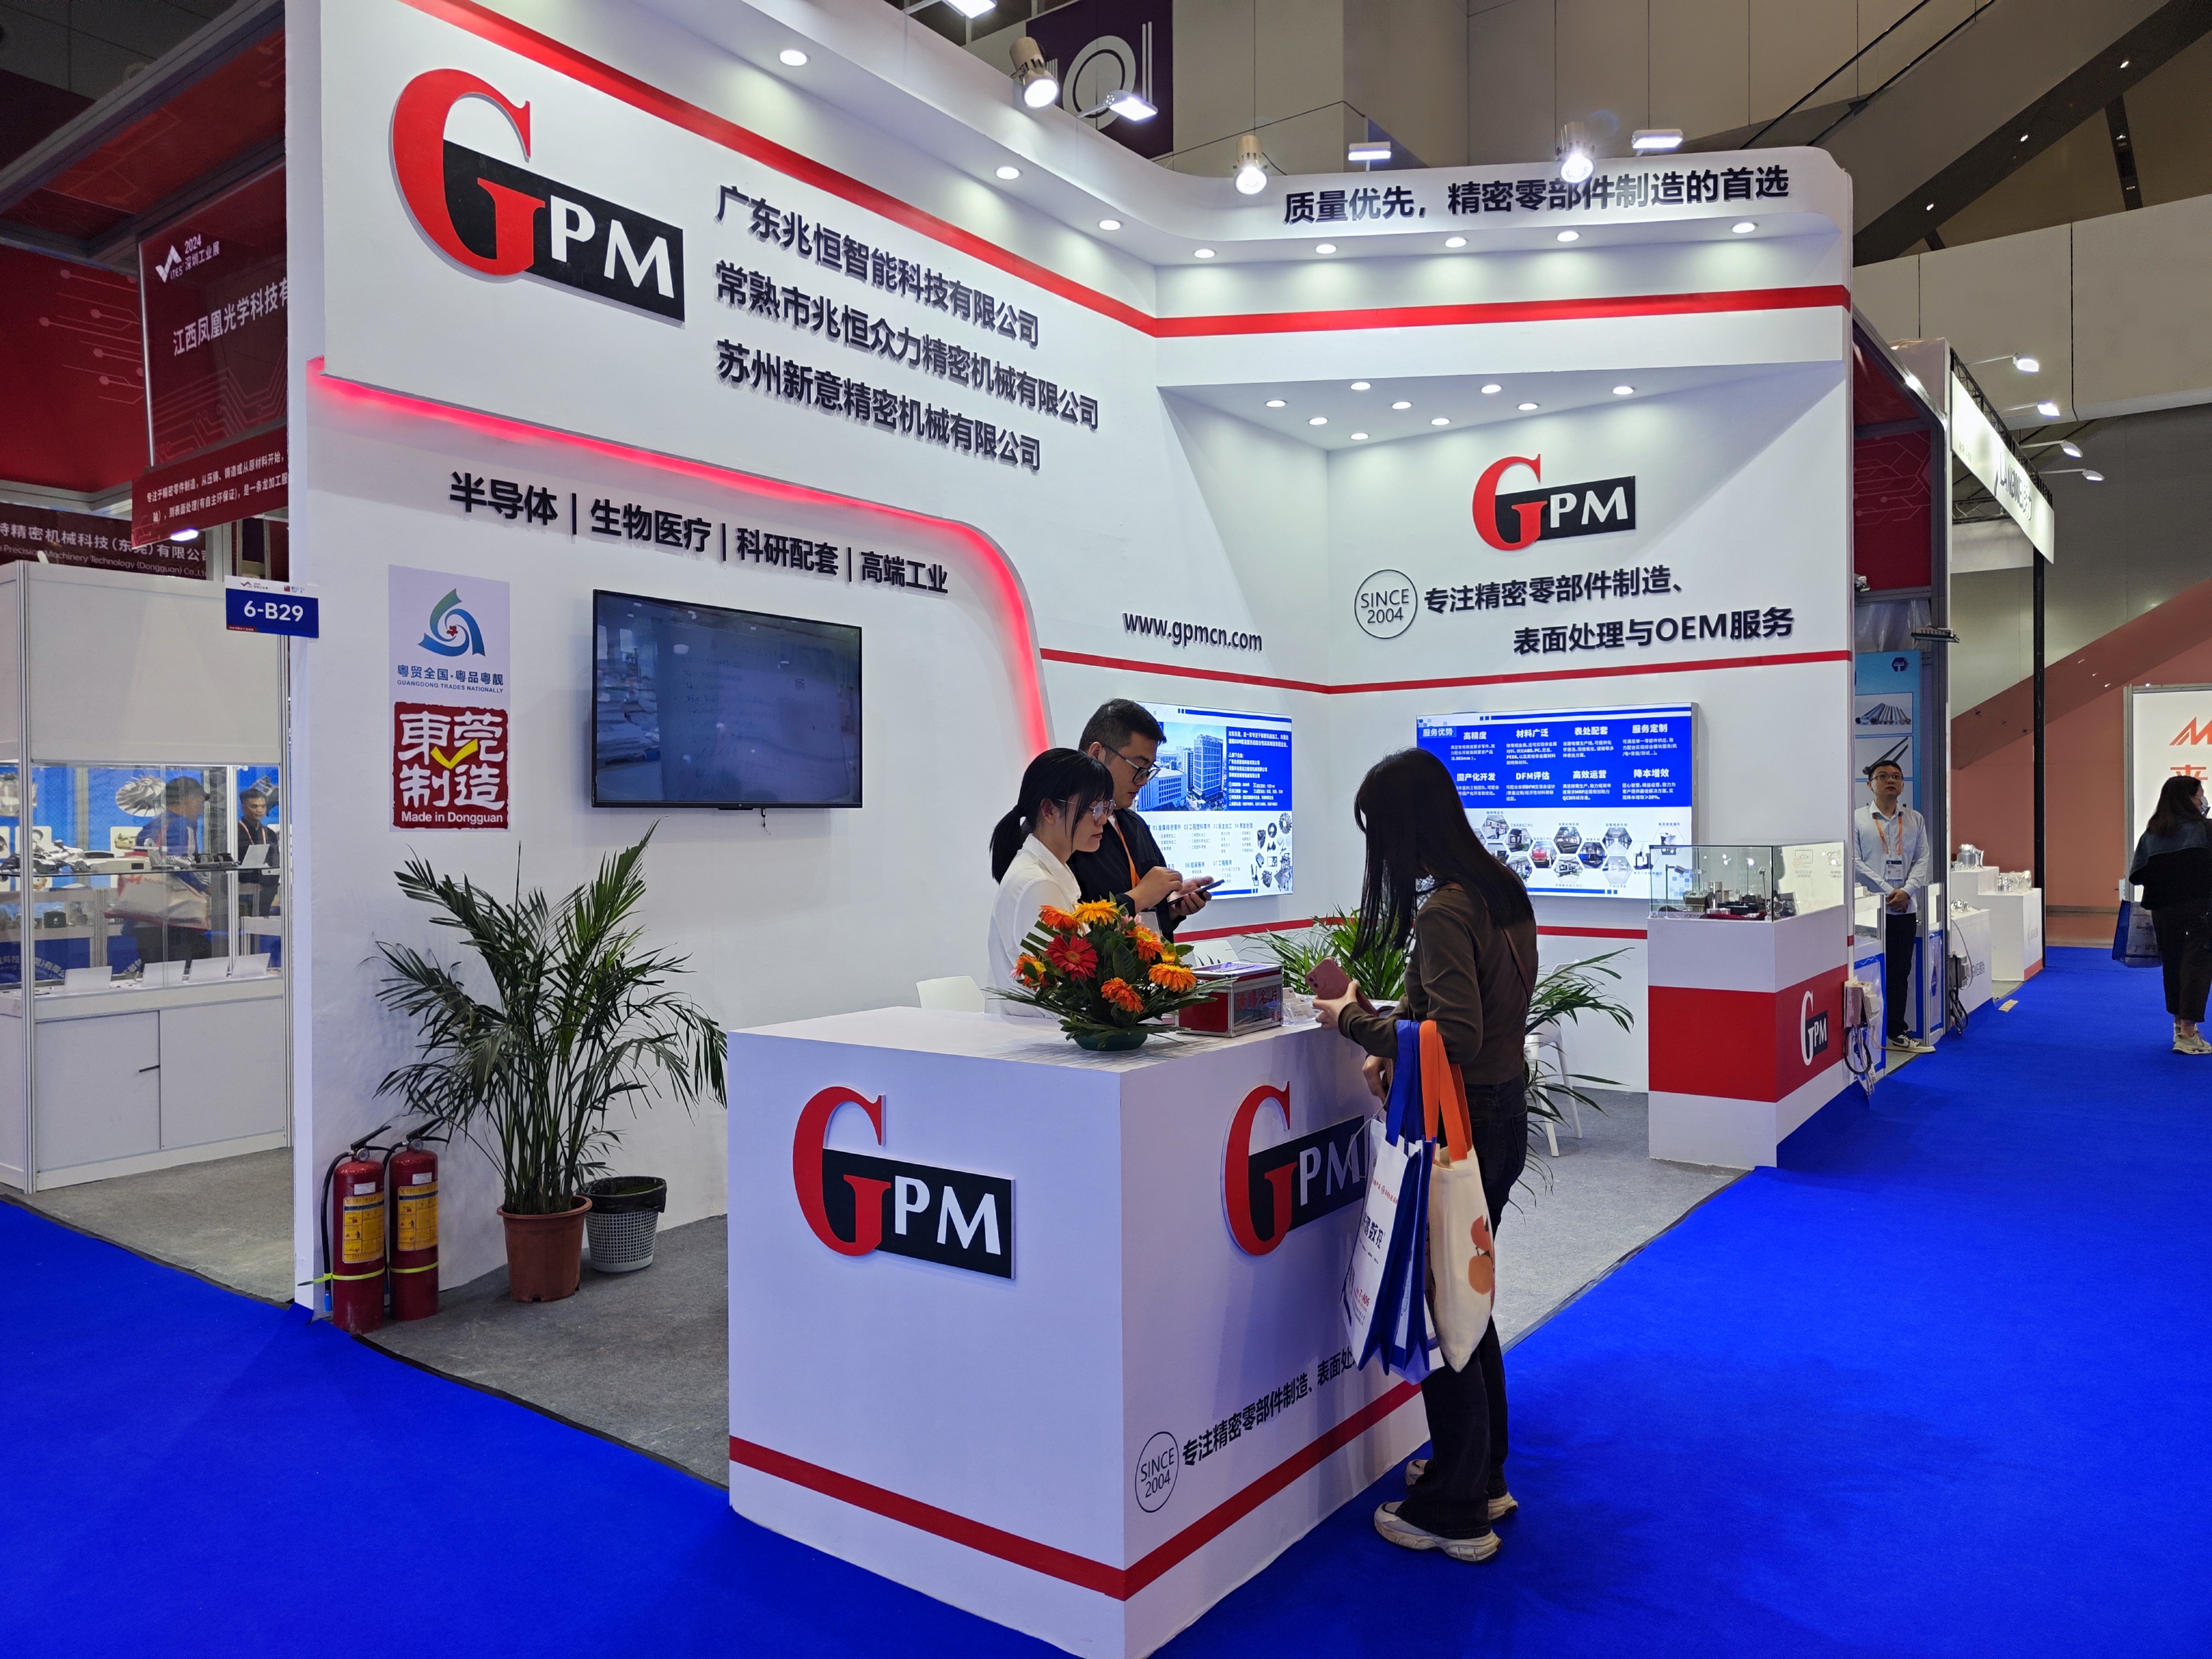 GPM Debuted at the Shenzhen Industrial Exhibition